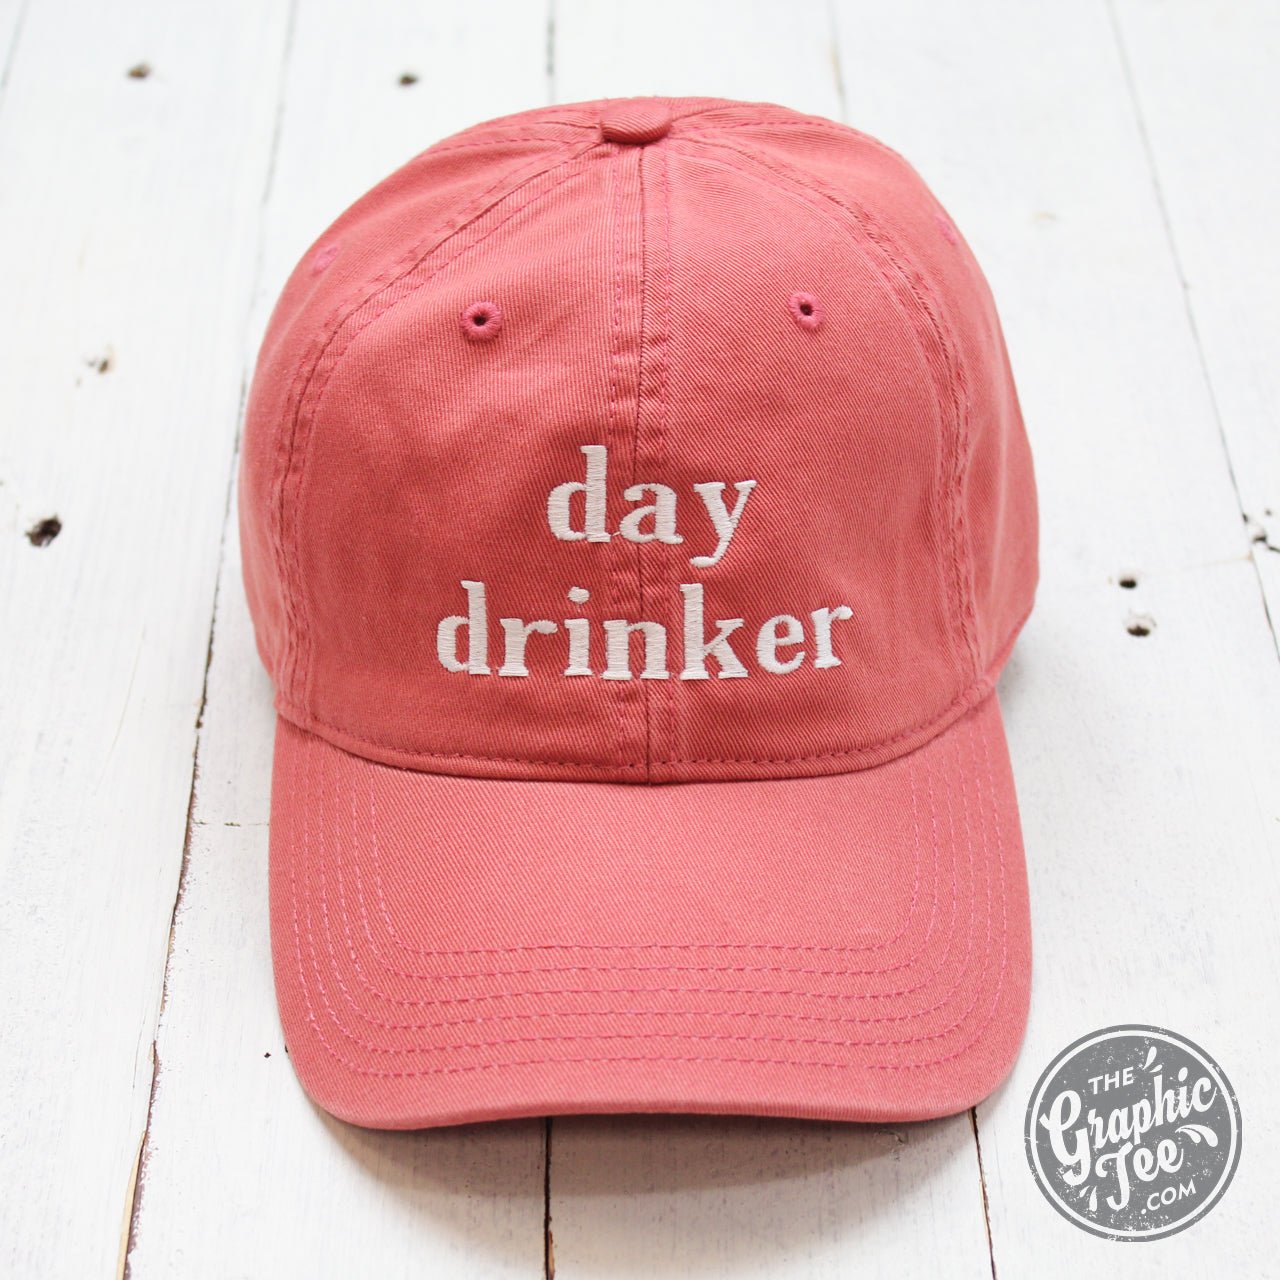 Day Drinker - Nantucket Red Relaxed Twill Dad Hat - The Graphic Tee